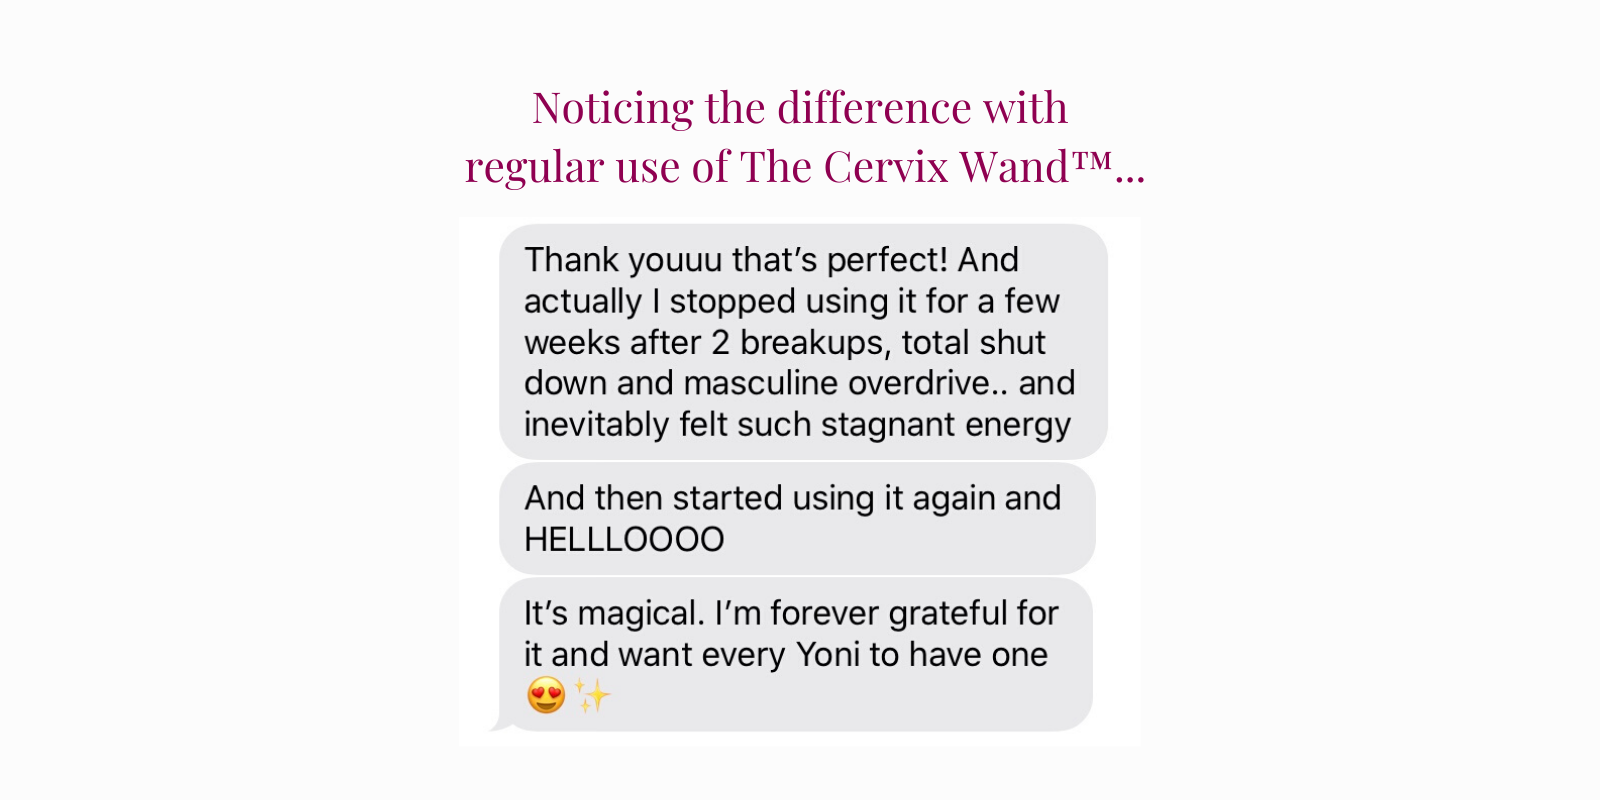 The Cervix Wand